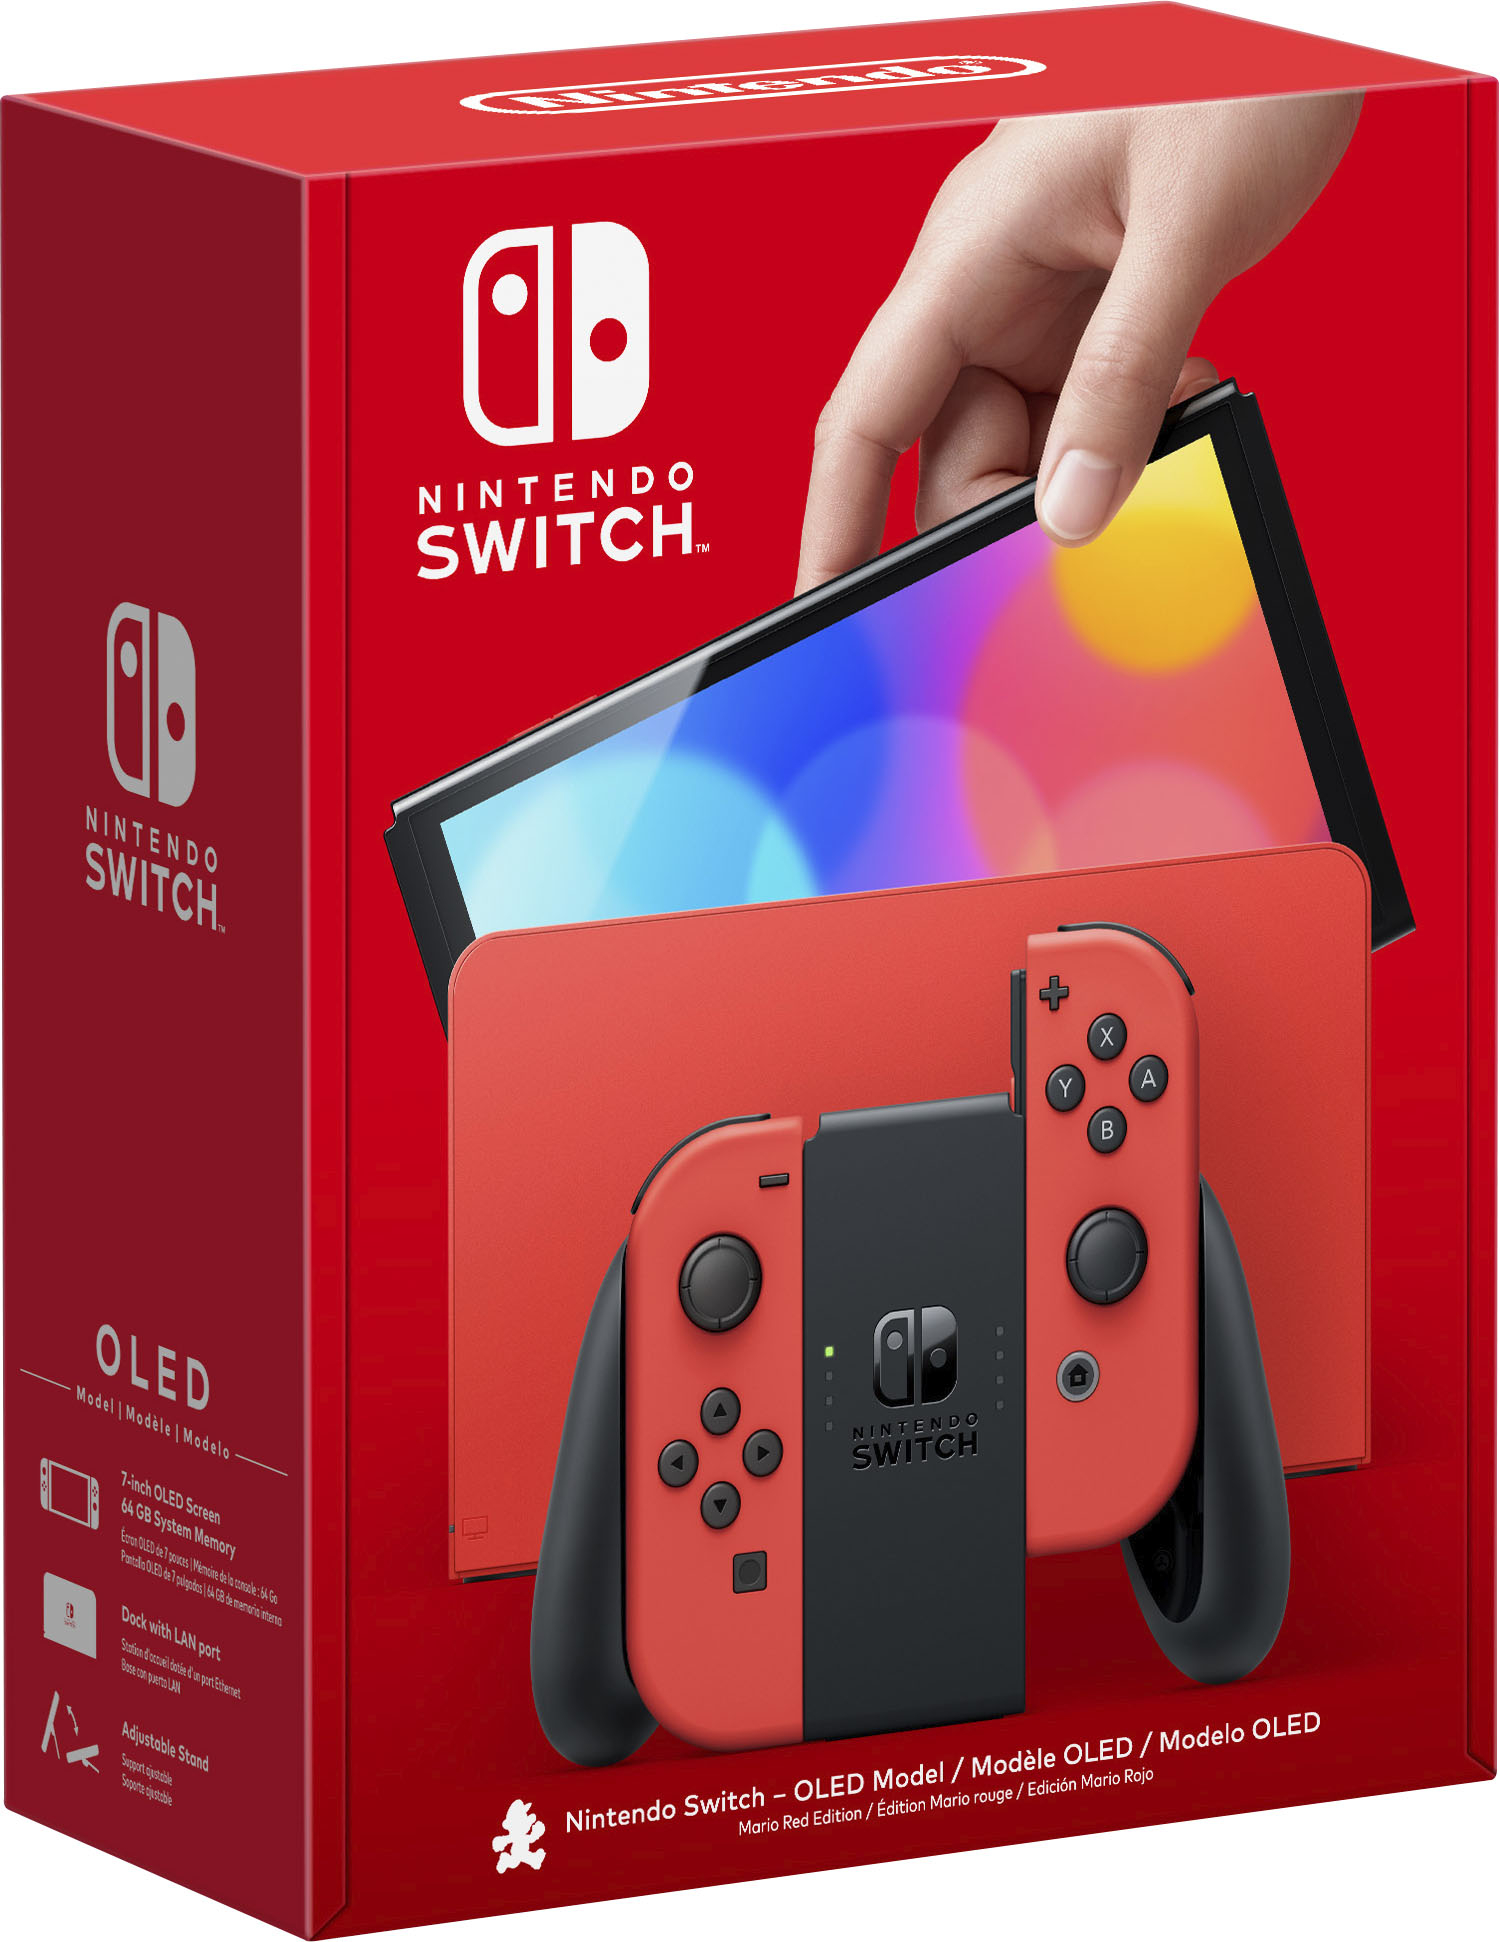 Nintendo Switch OLED vs normal Switch: what's the difference?